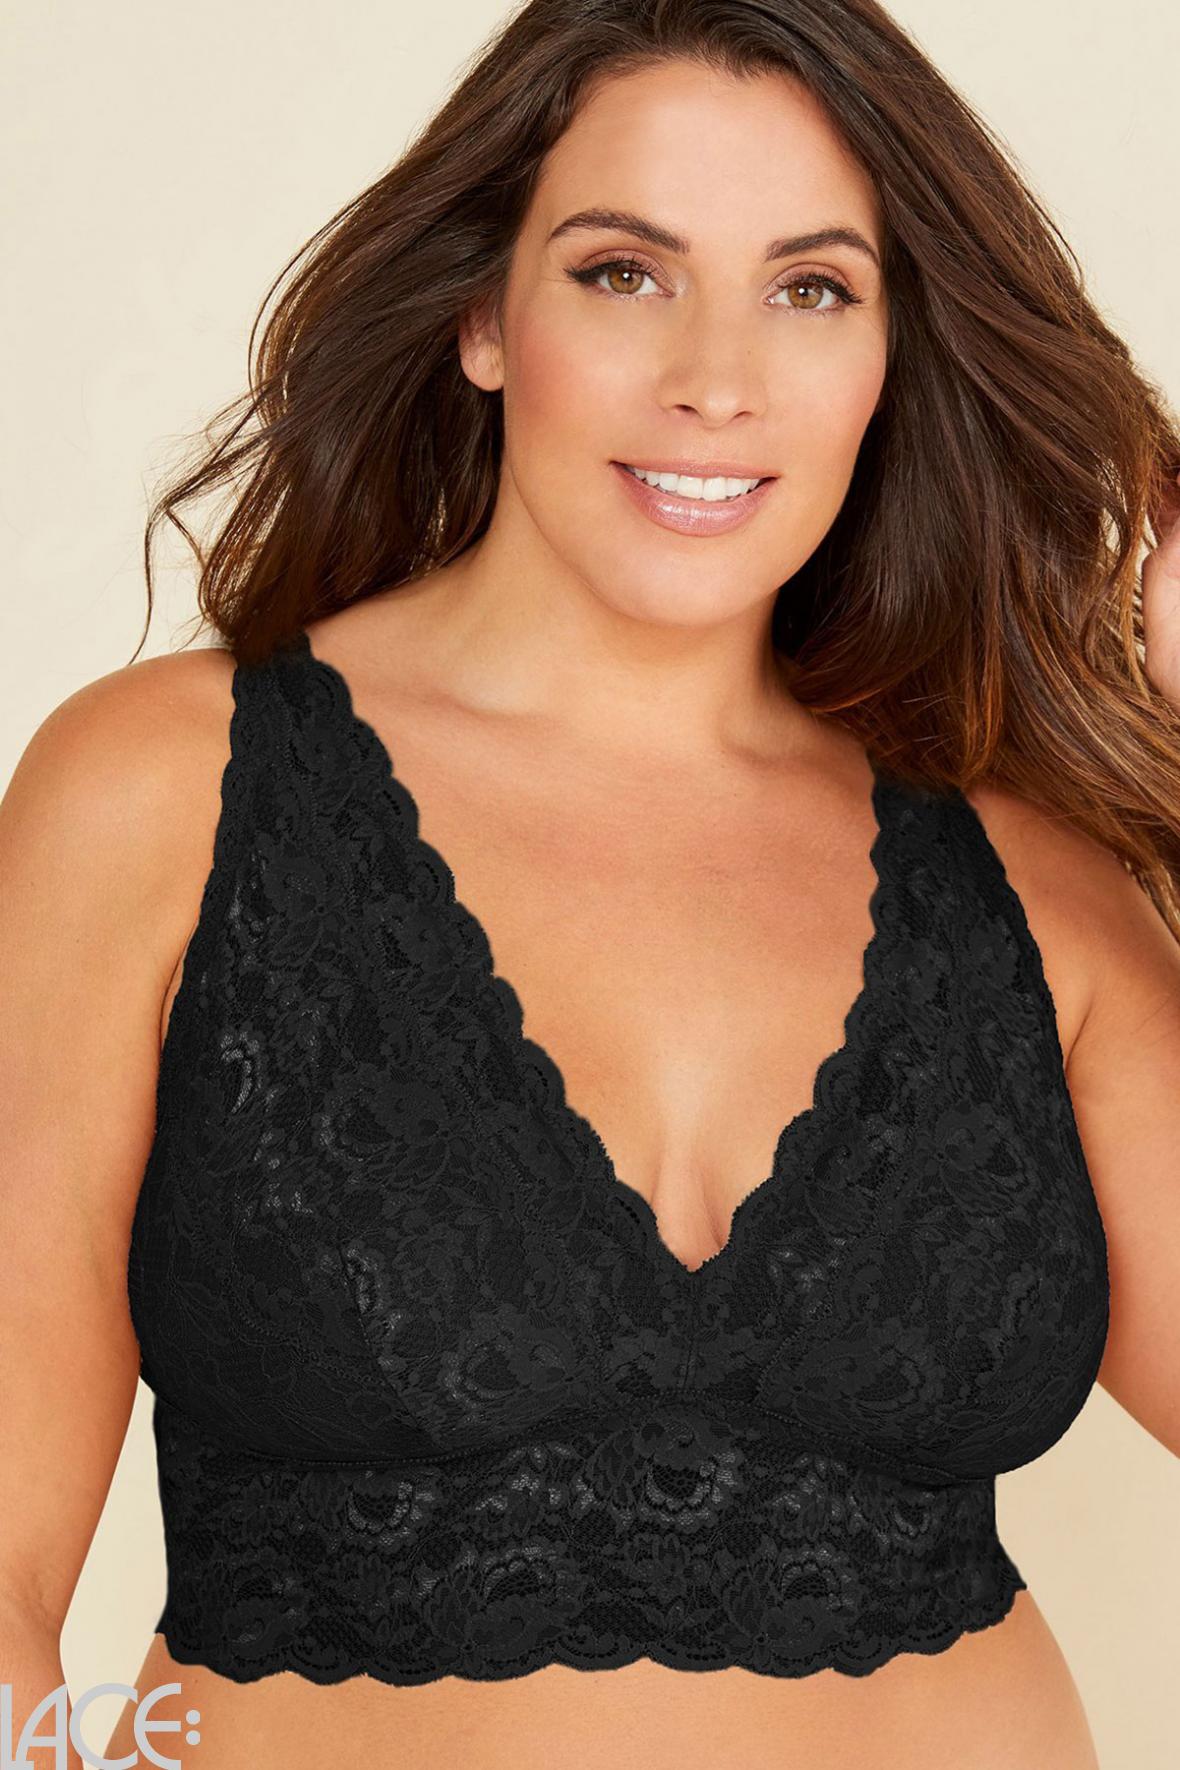  Bra - Wireless - Cosabella - Extended Curvy Plungie  Bralette without wire